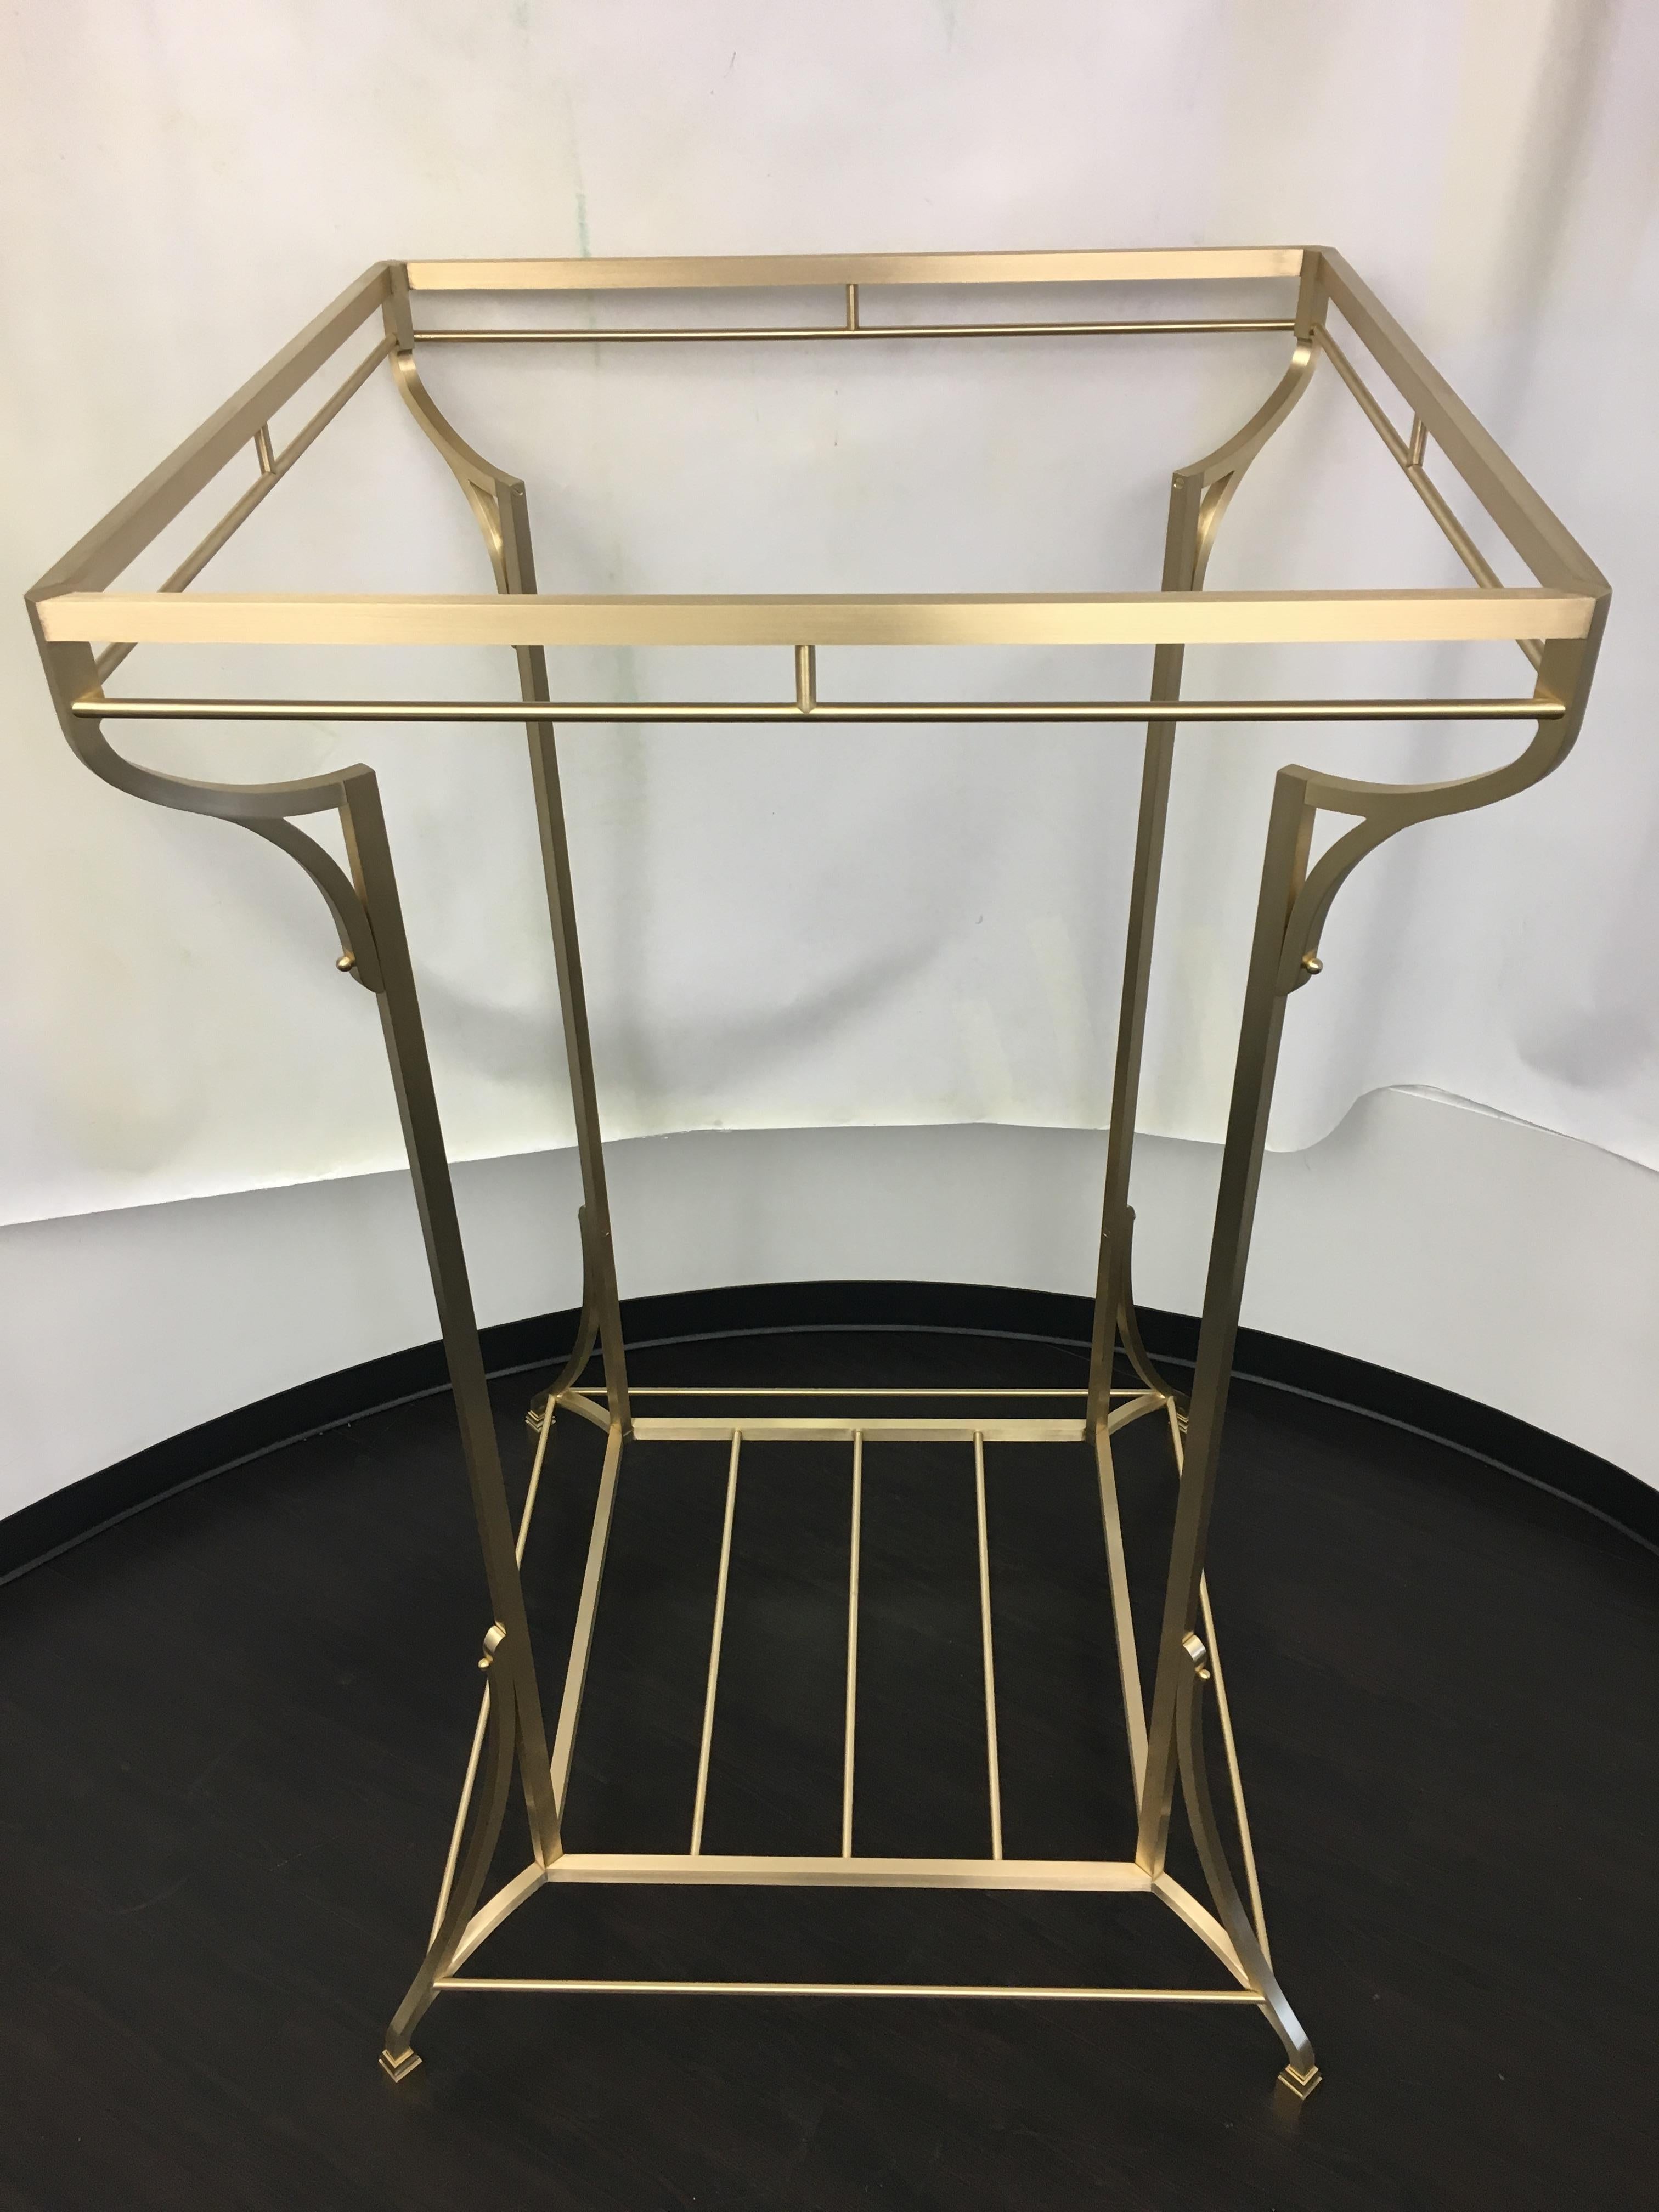 Beautifully handcrafted in our creative shop from solid architectural bronze. This piece can add organization to a closet or function as a coat rack. The lower shelve can also accommodate shoes. Aesthetically proportional curvature adds elegance to